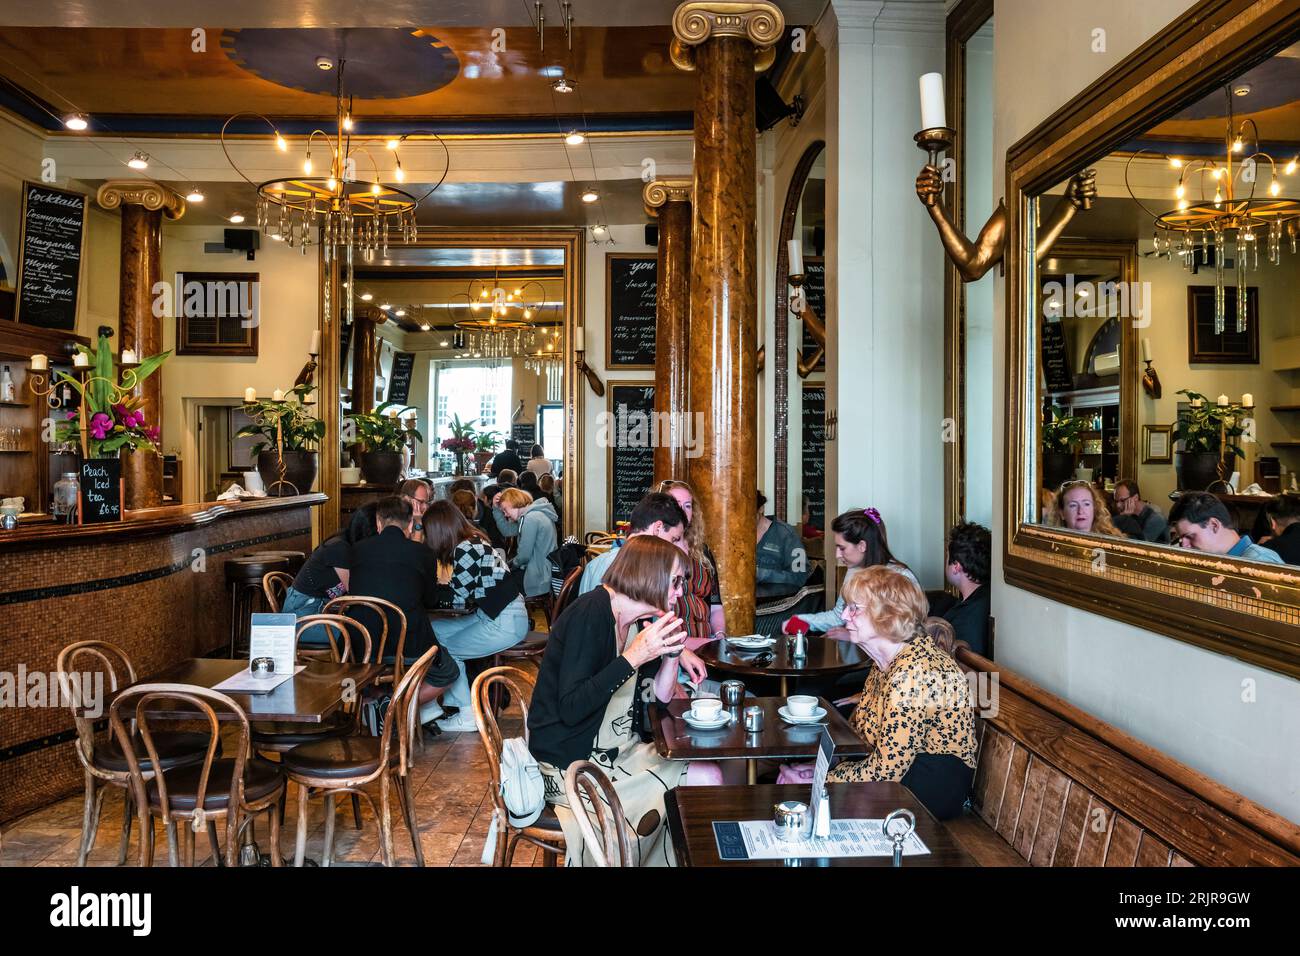 The Grand Cafe, a historic coffee house, in Oxford, England, UK Stock Photo